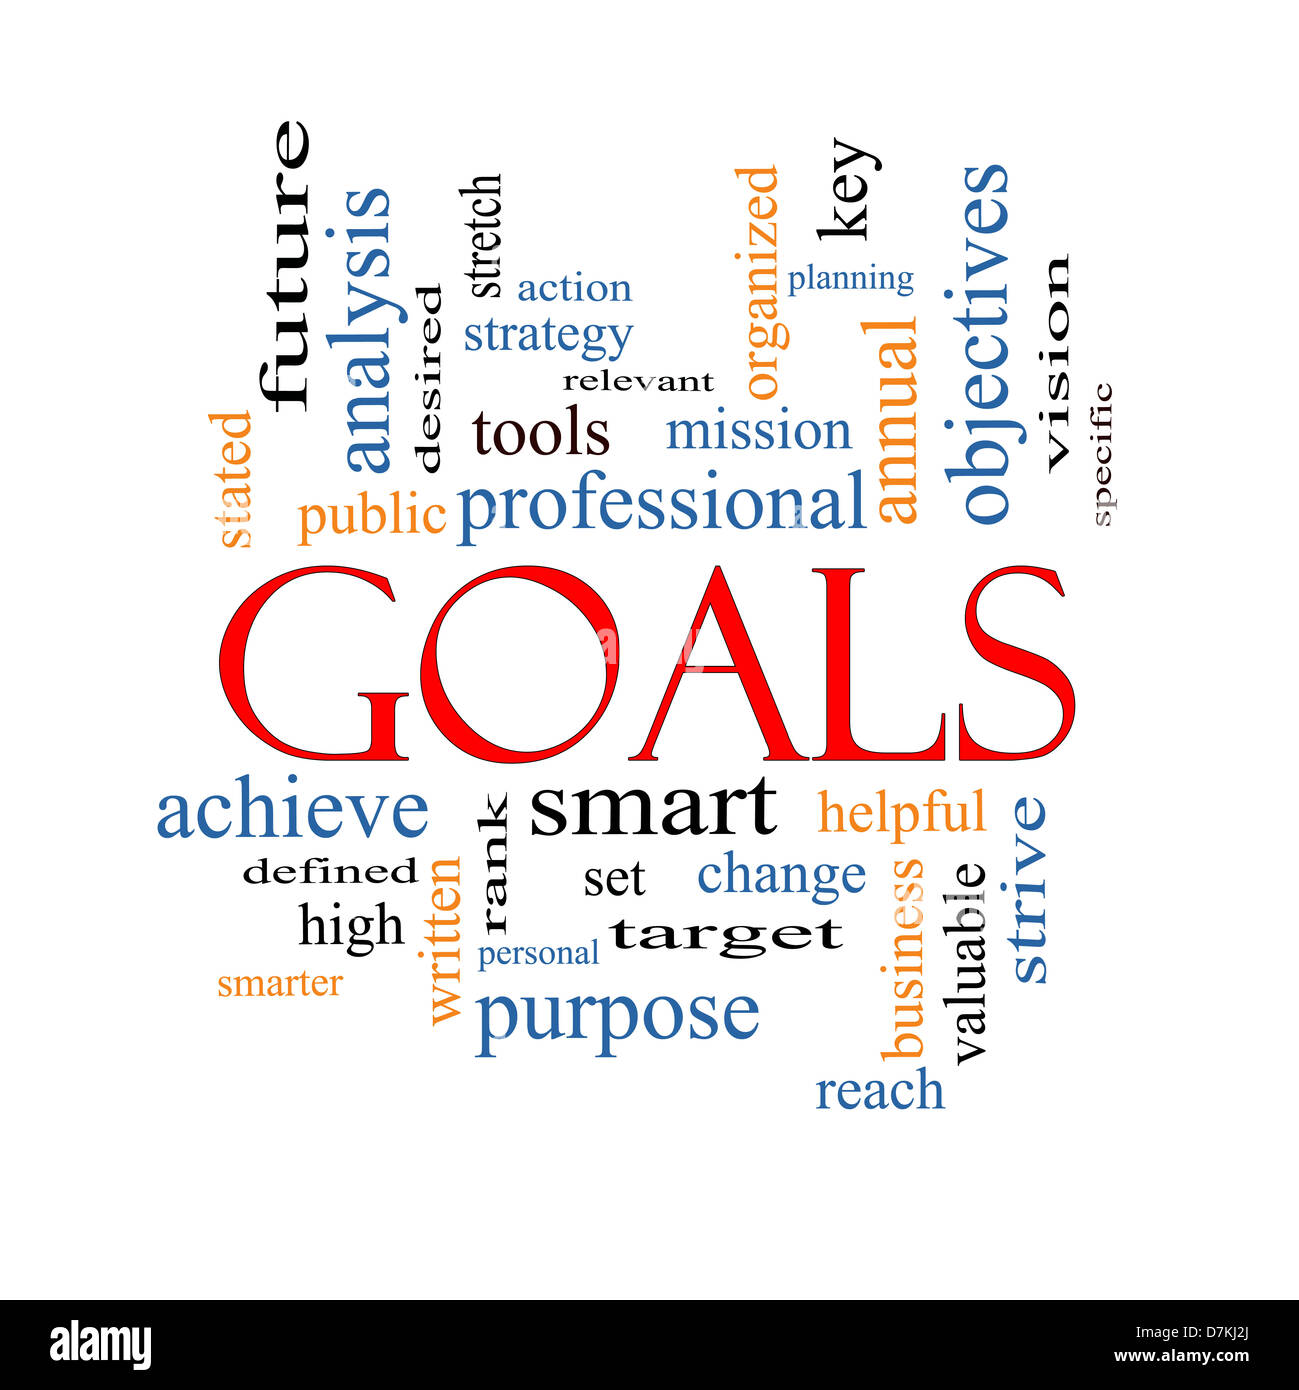 Goals Word Cloud Concept with great terms such as planning, missions, smart, set, high and more. Stock Photo